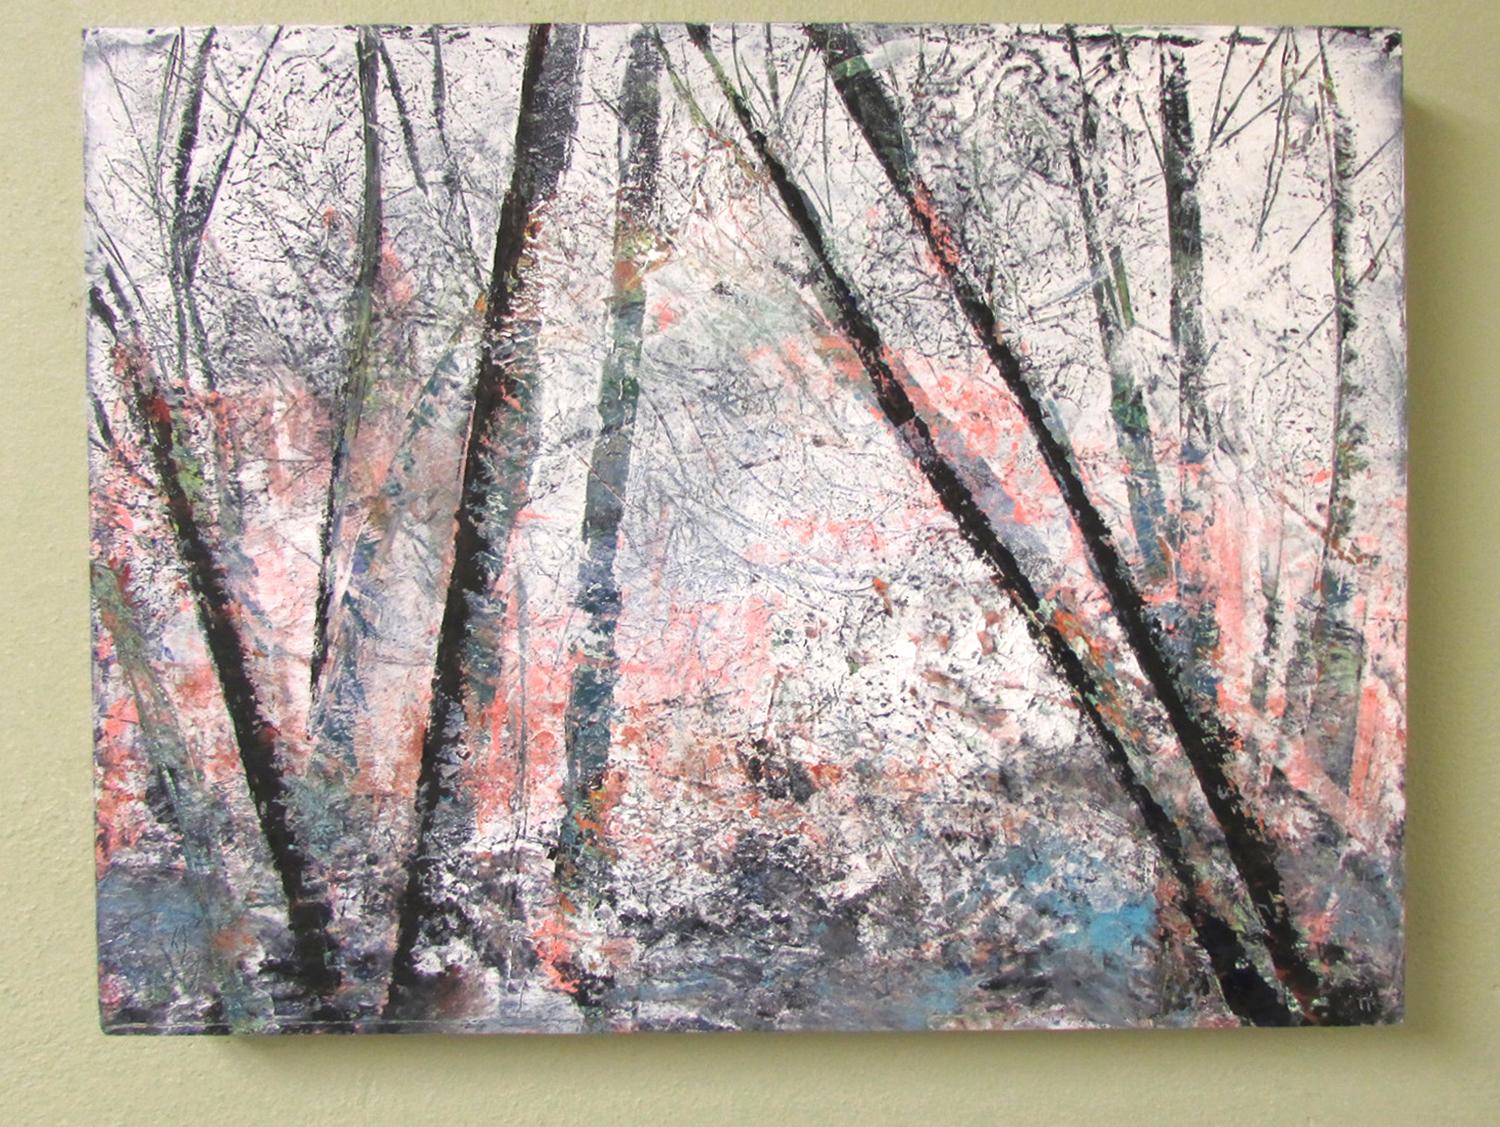 Bare Trees #5, Abstract Oil Painting - Gray Abstract Painting by Valerie Berkely